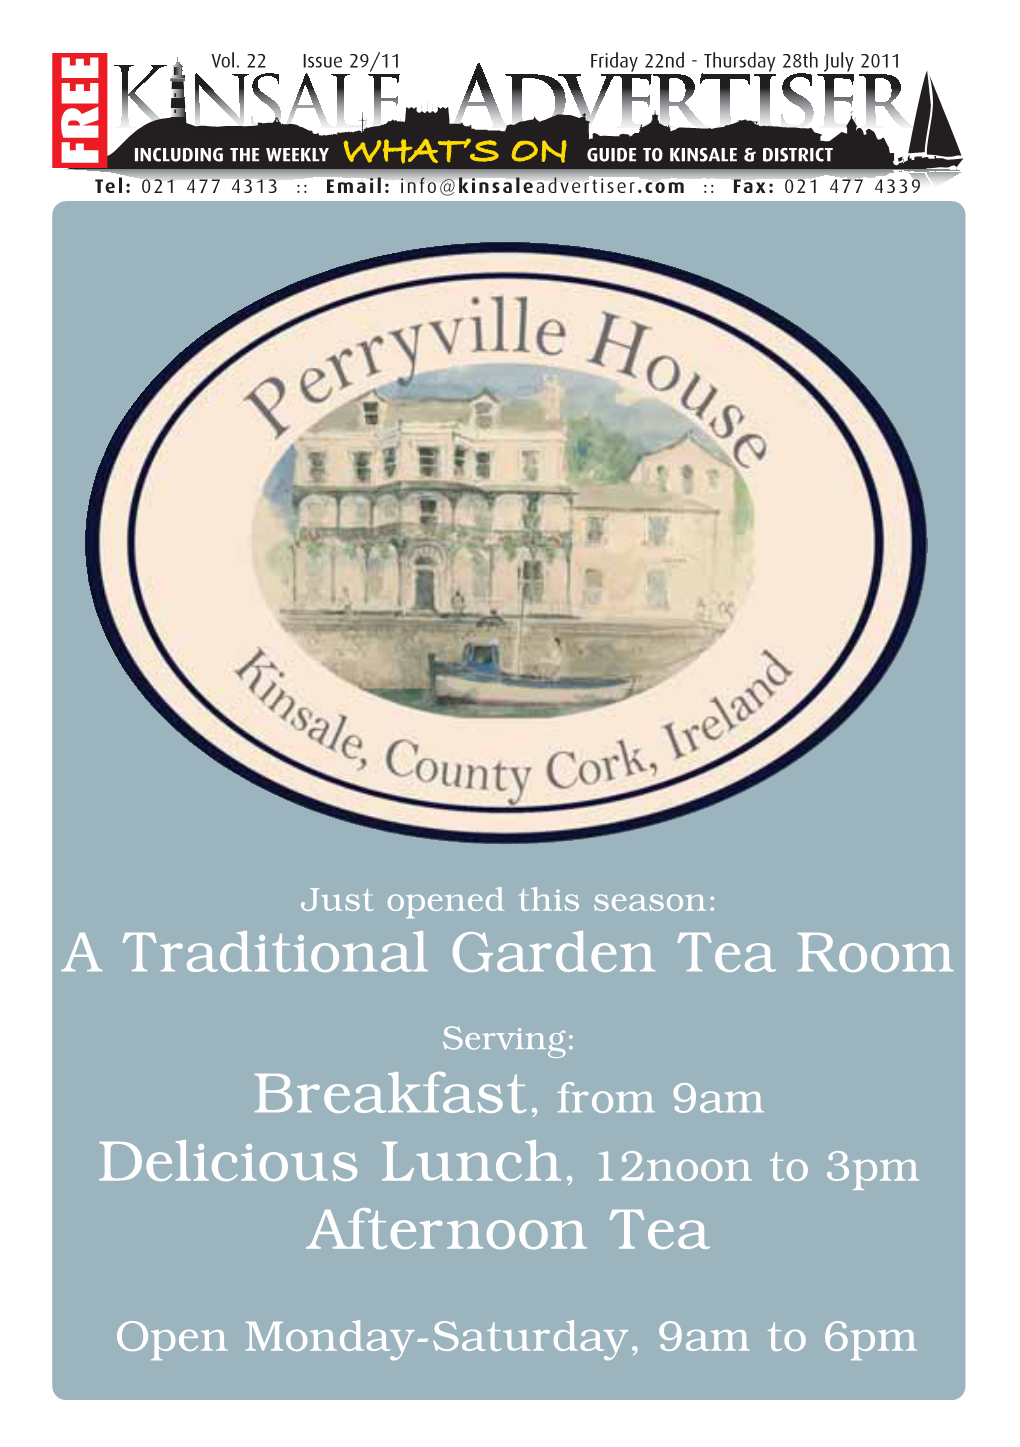 A Traditional Garden Tea Room Delicious Lunch, 12Noon to 3Pm